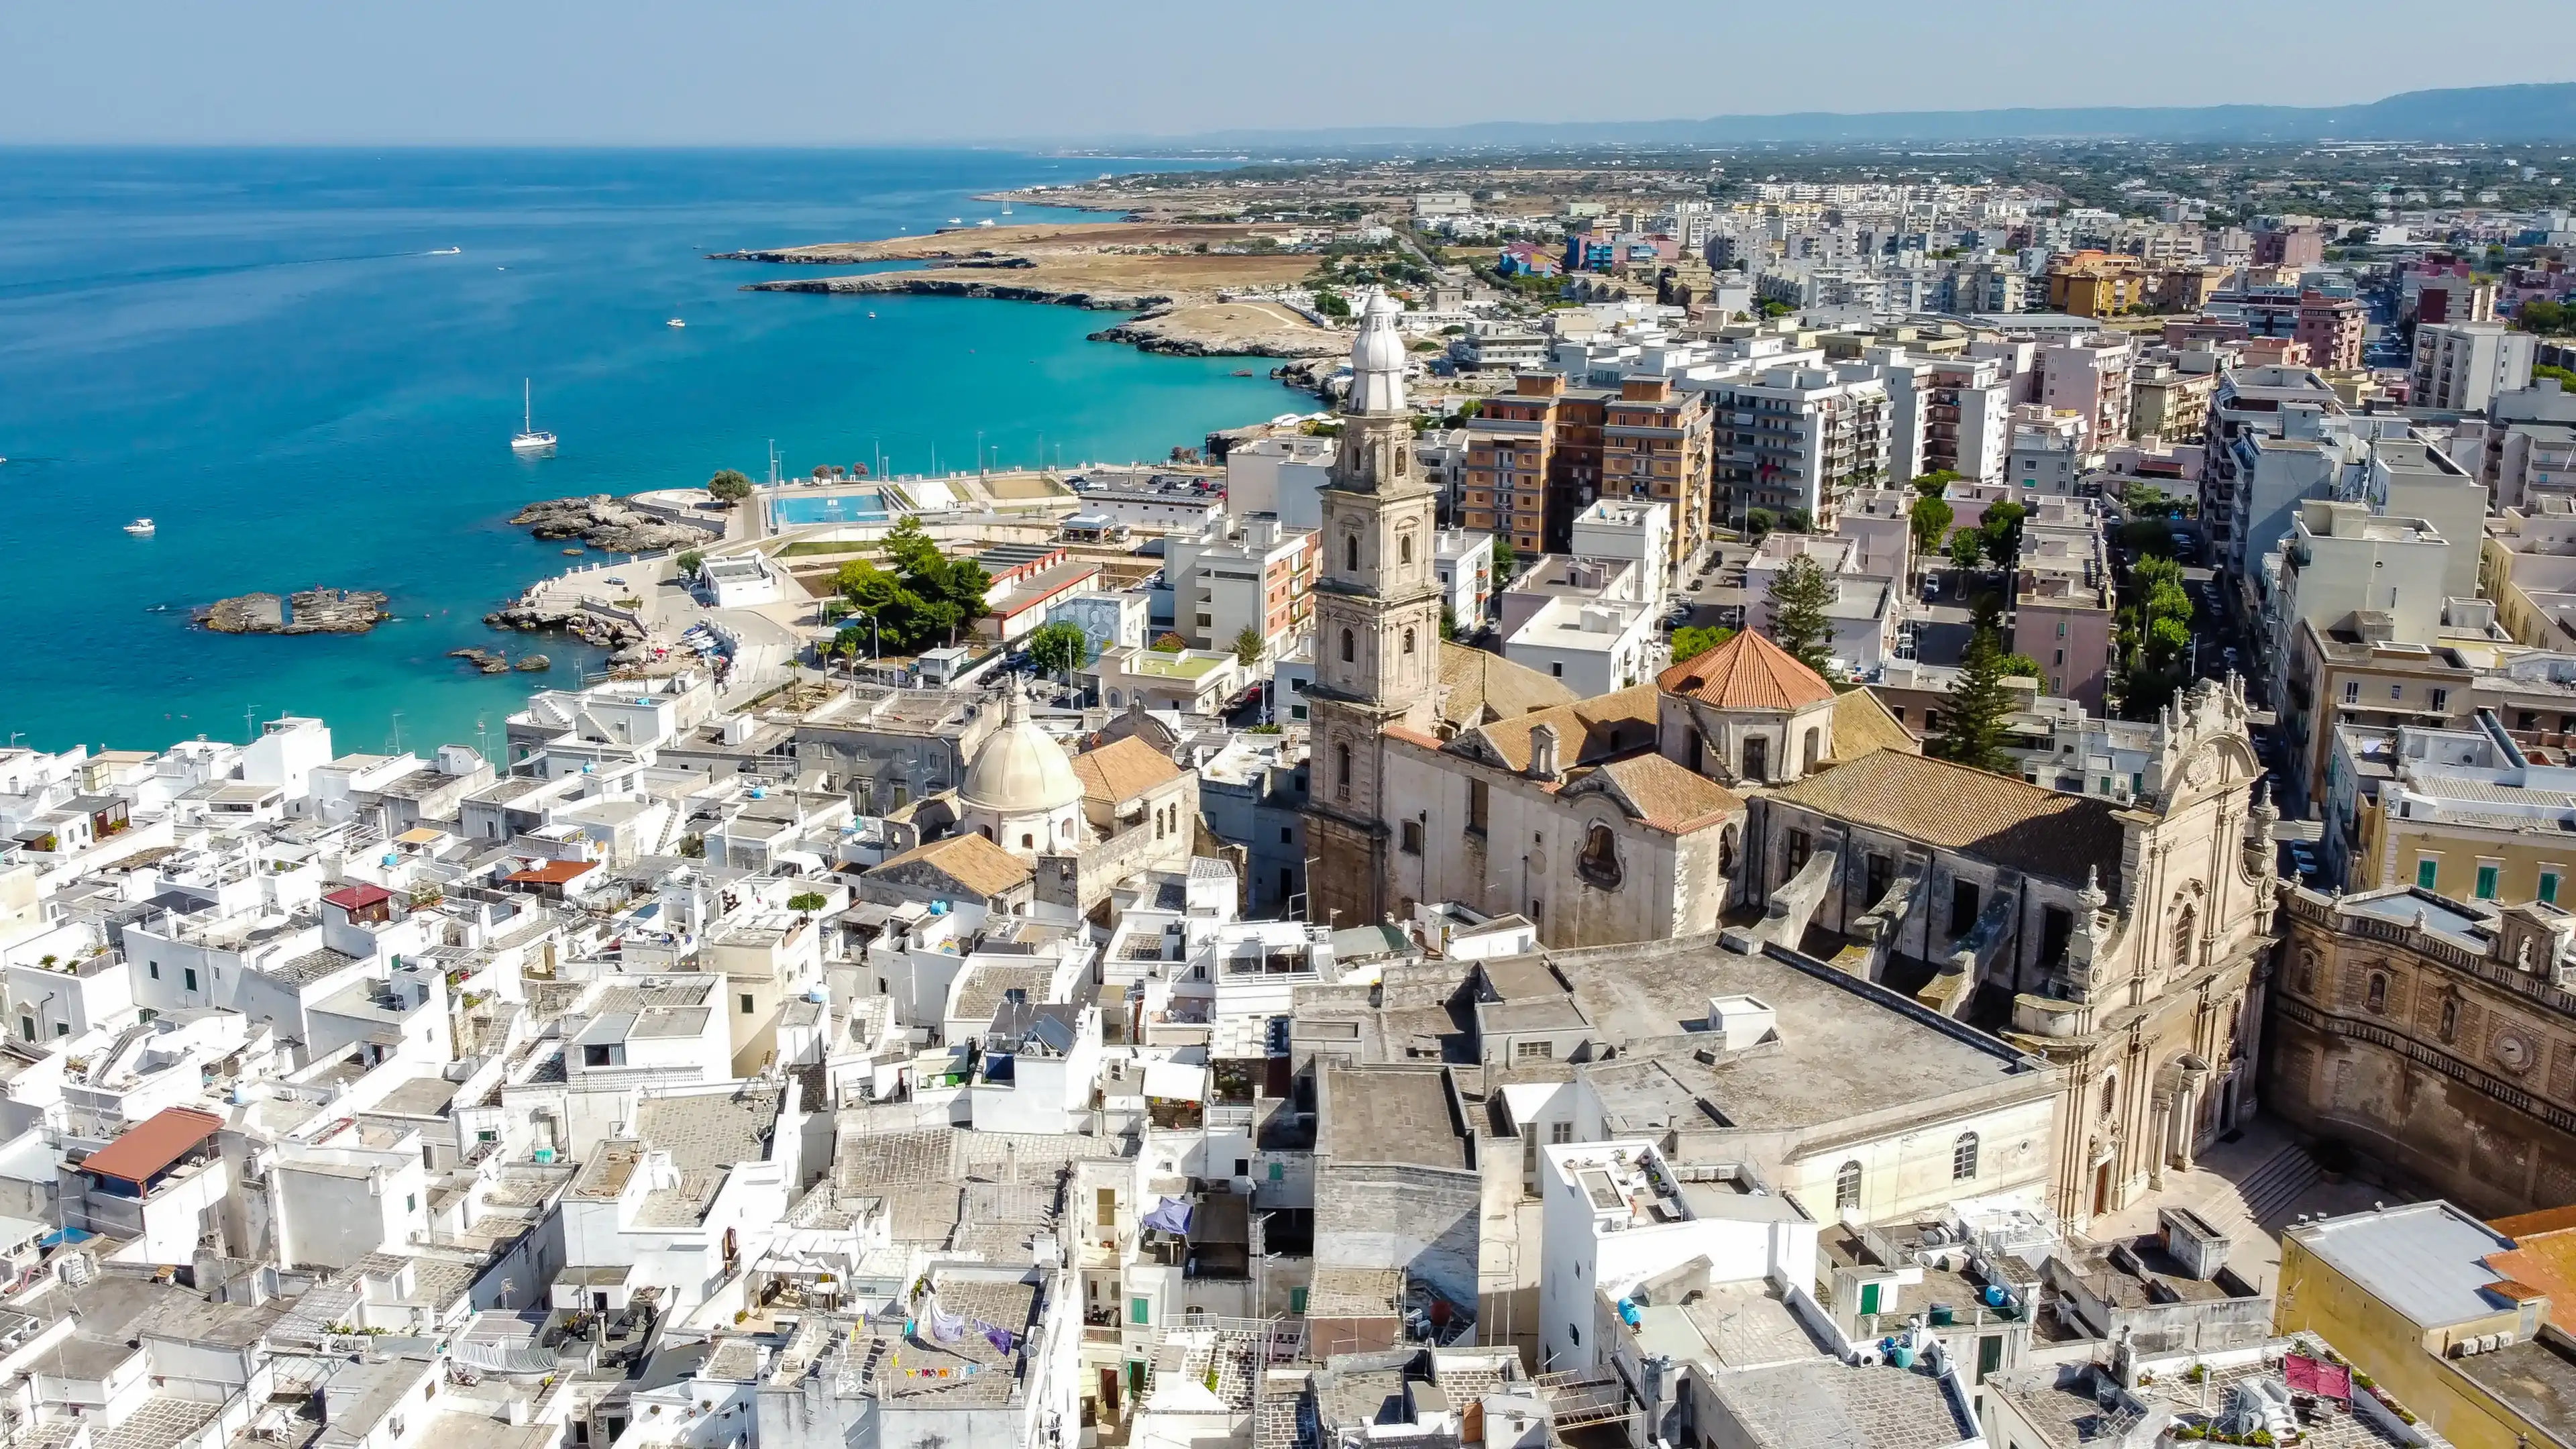 Aerial view of Monopoli in Apulia, south of Italy - Monopoli Cathedral aka Basilica of the Madonna della Madia from above, in front of the Adriatic Sea